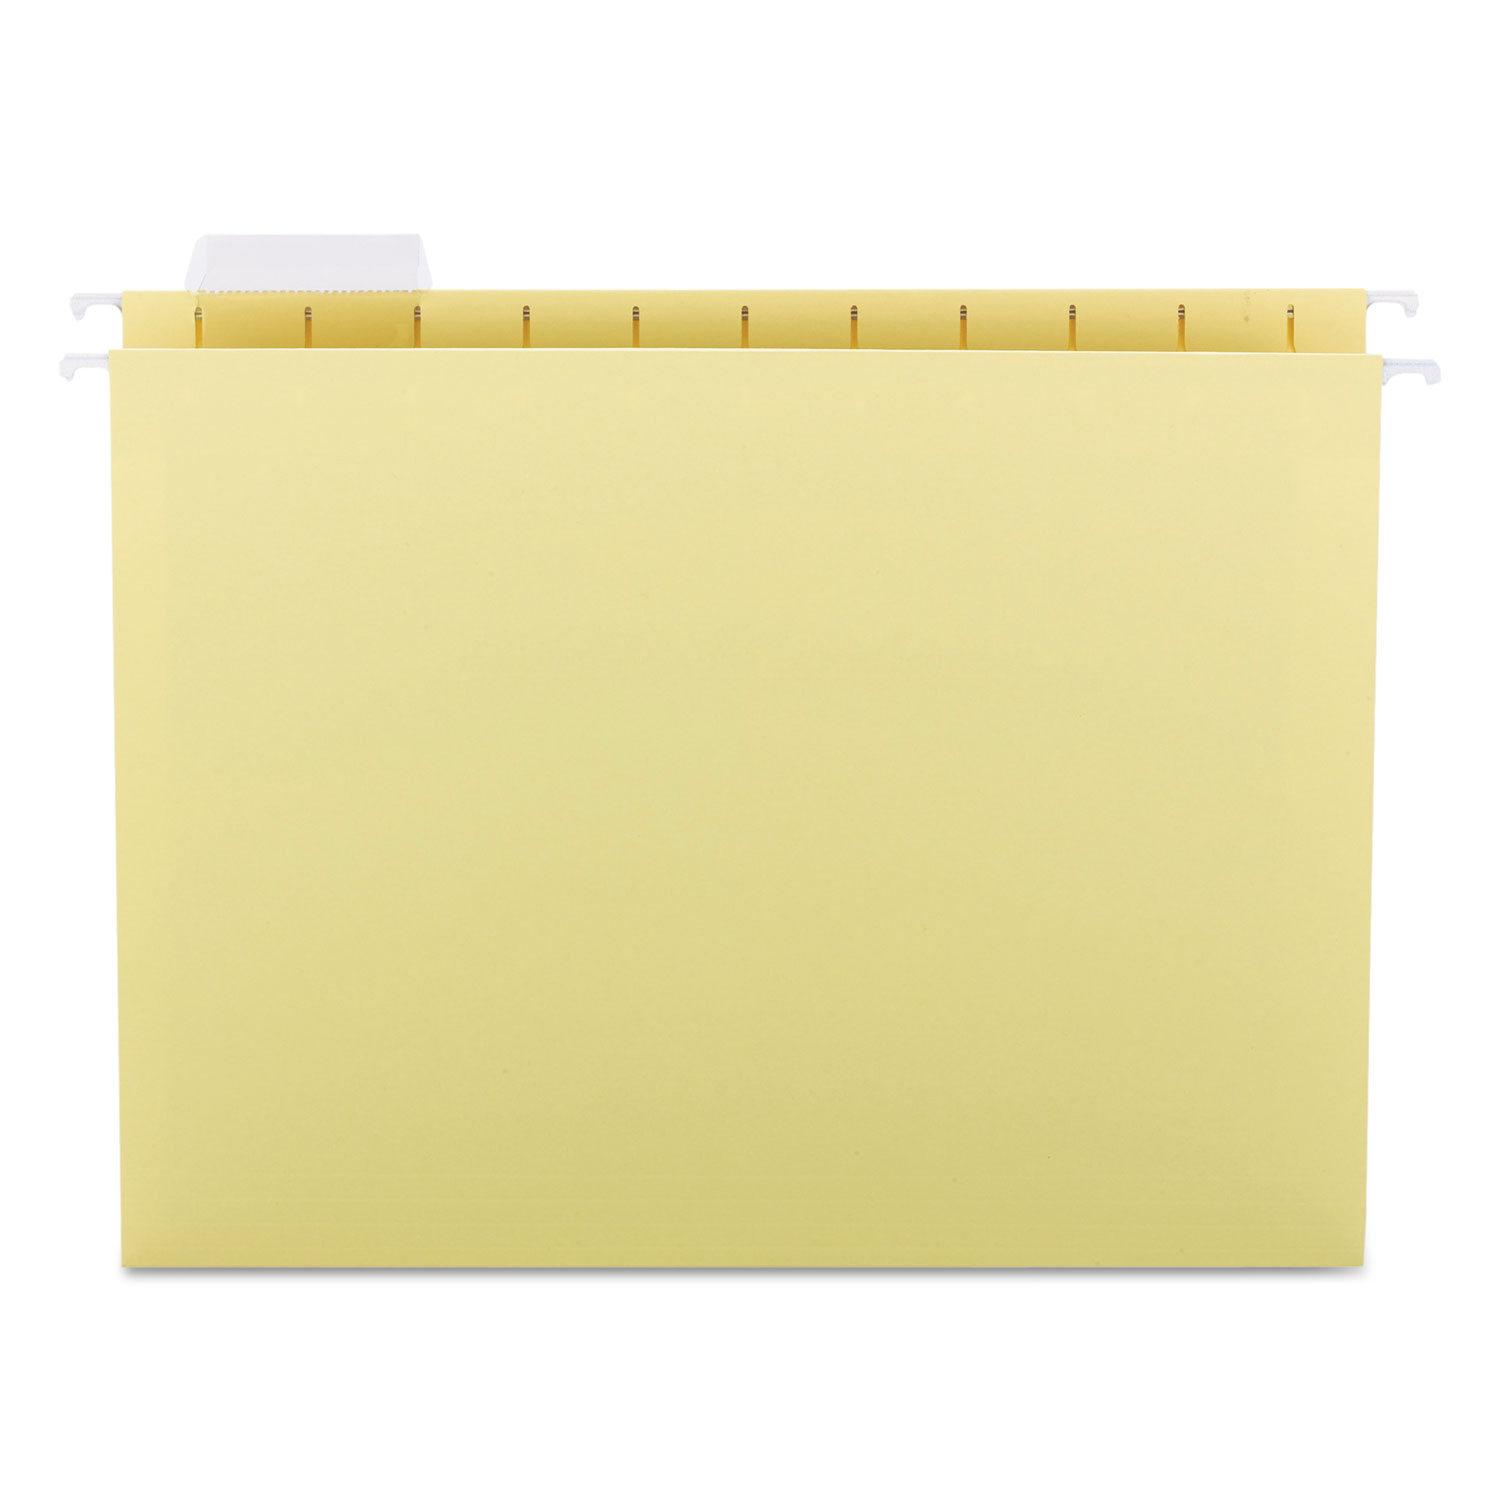  Smead 64069 Colored Hanging File Folders, Letter Size, 1/5-Cut Tab, Yellow, 25/Box (SMD64069) 